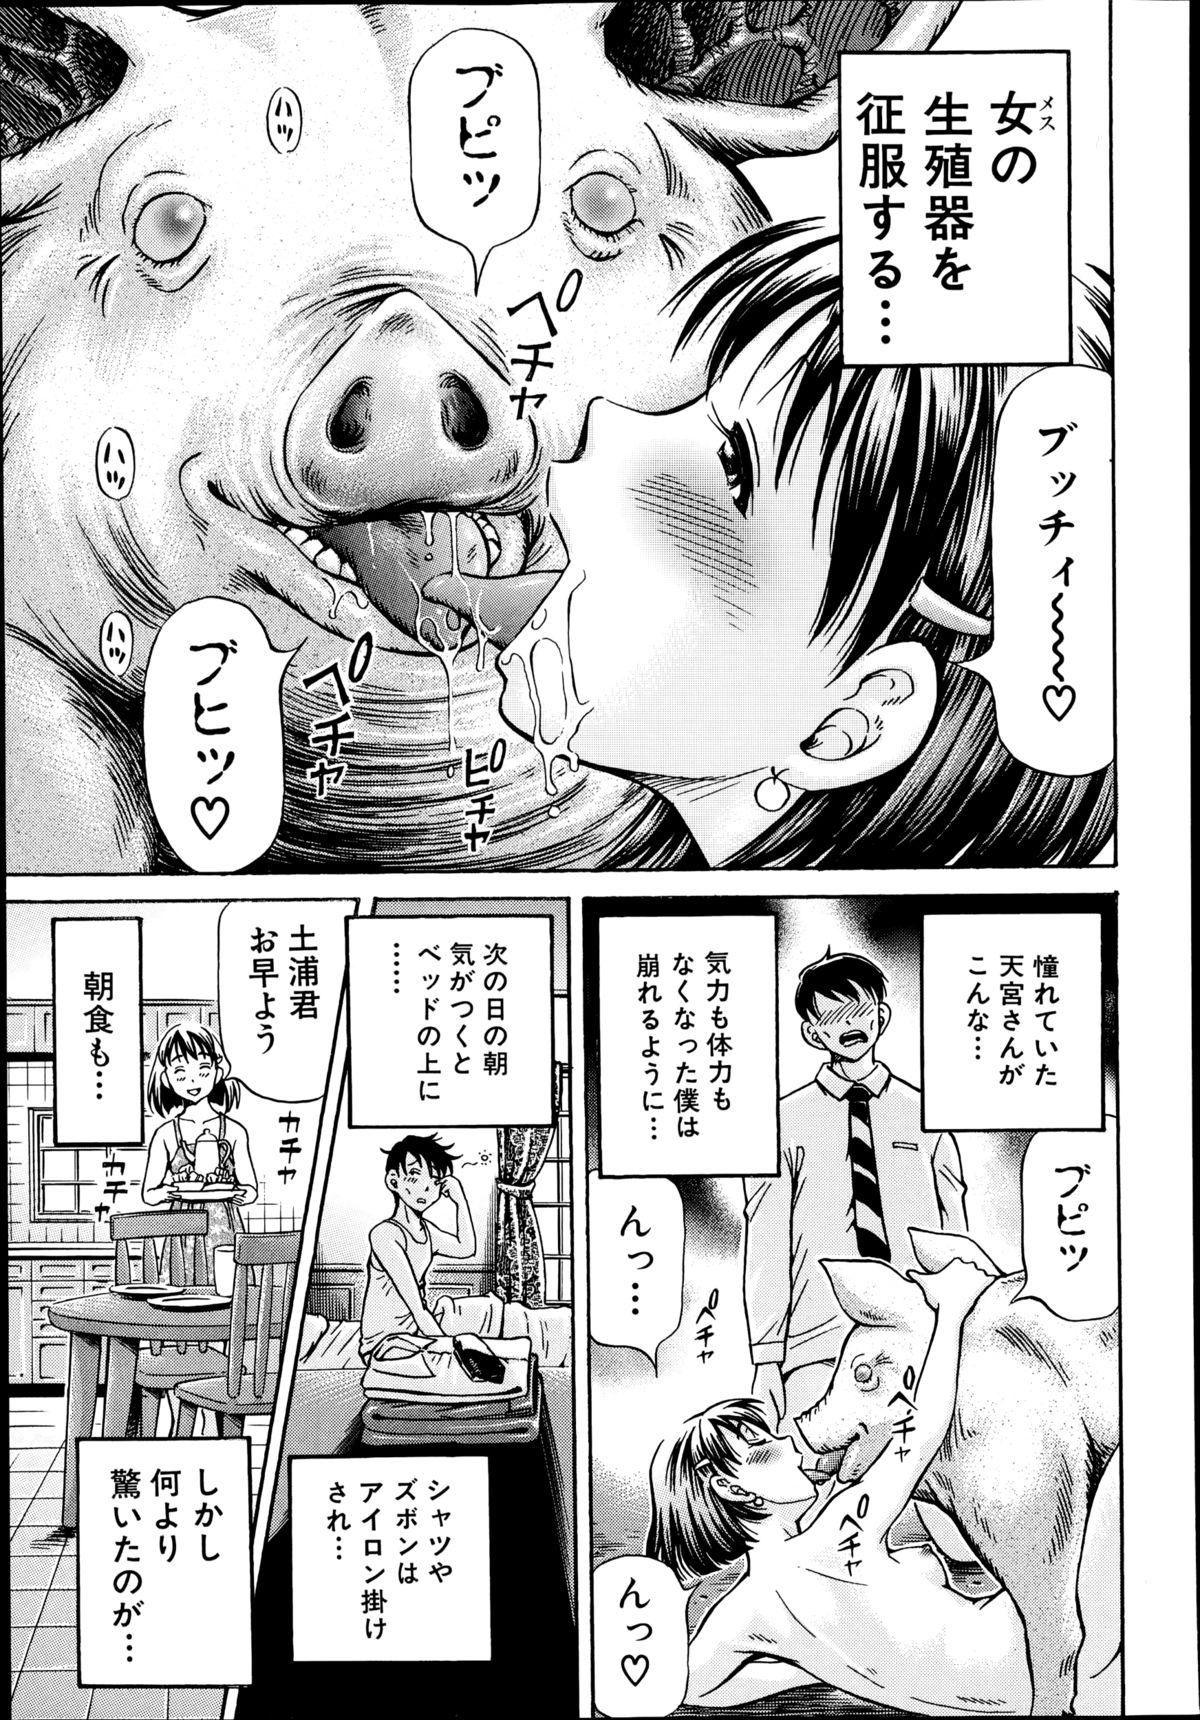 BUSTER COMIC 2014-11 129